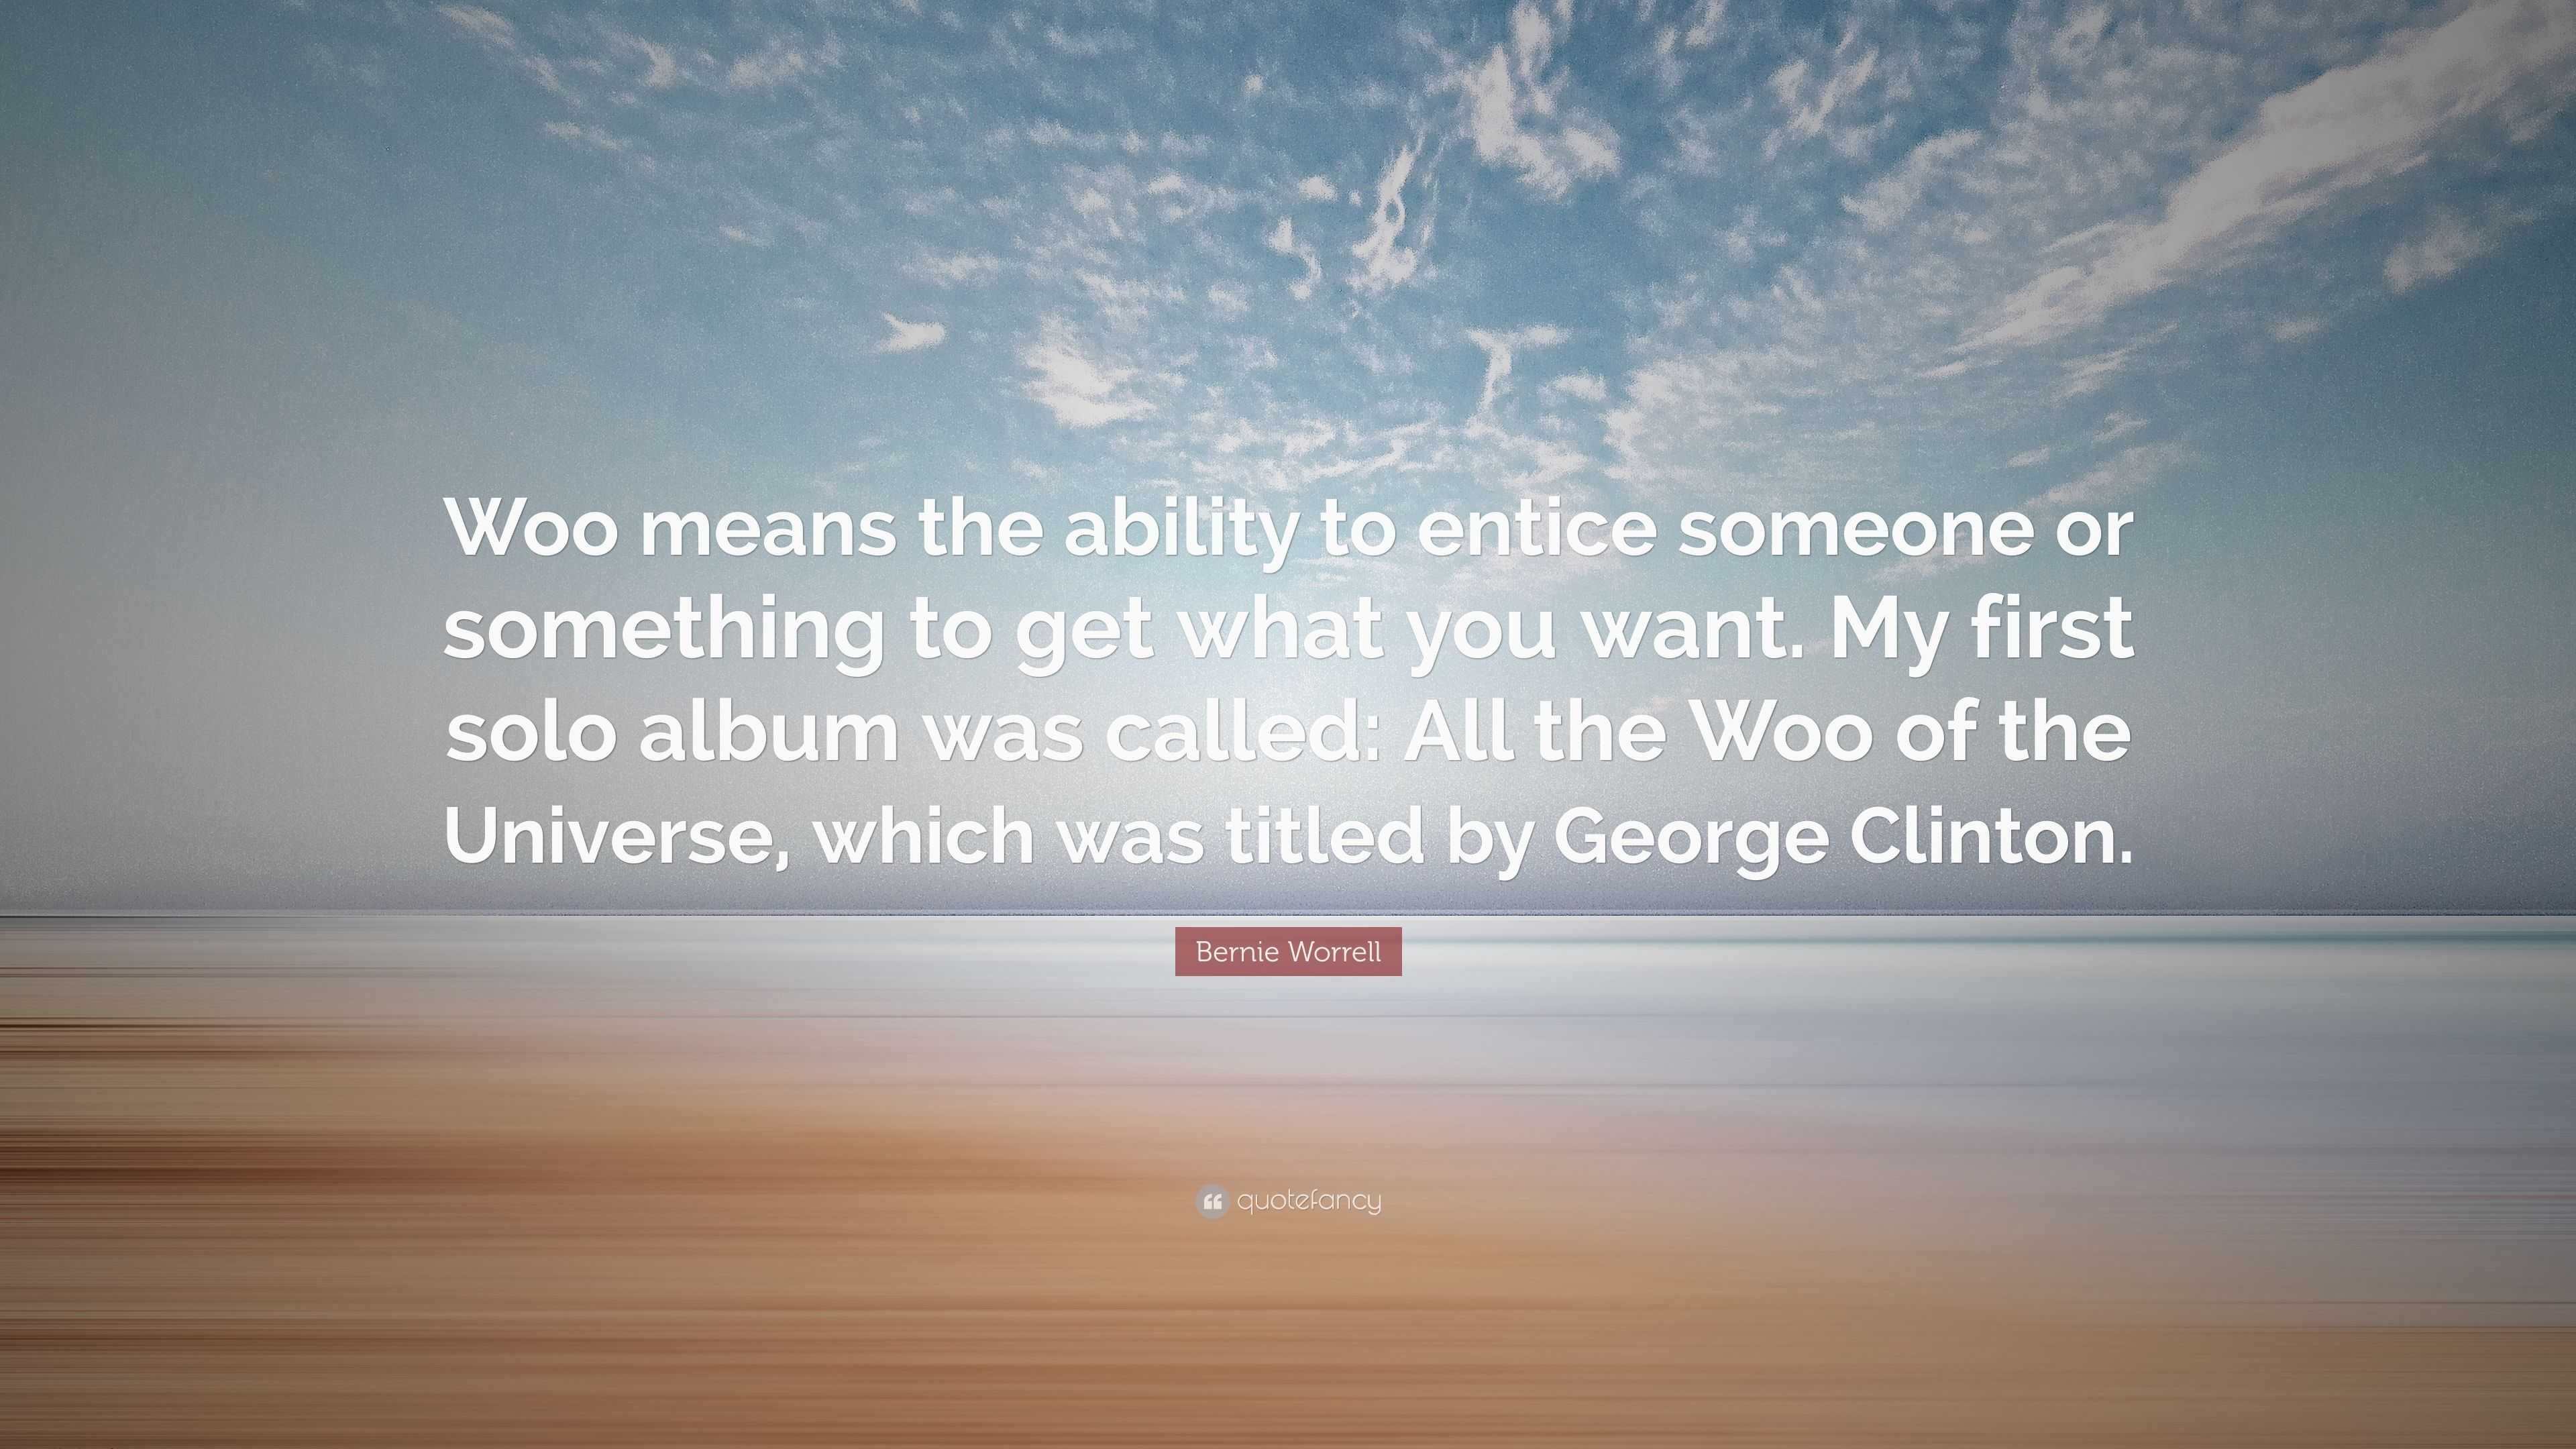 Bernie Worrell Quote: “Woo means the ability to entice someone or